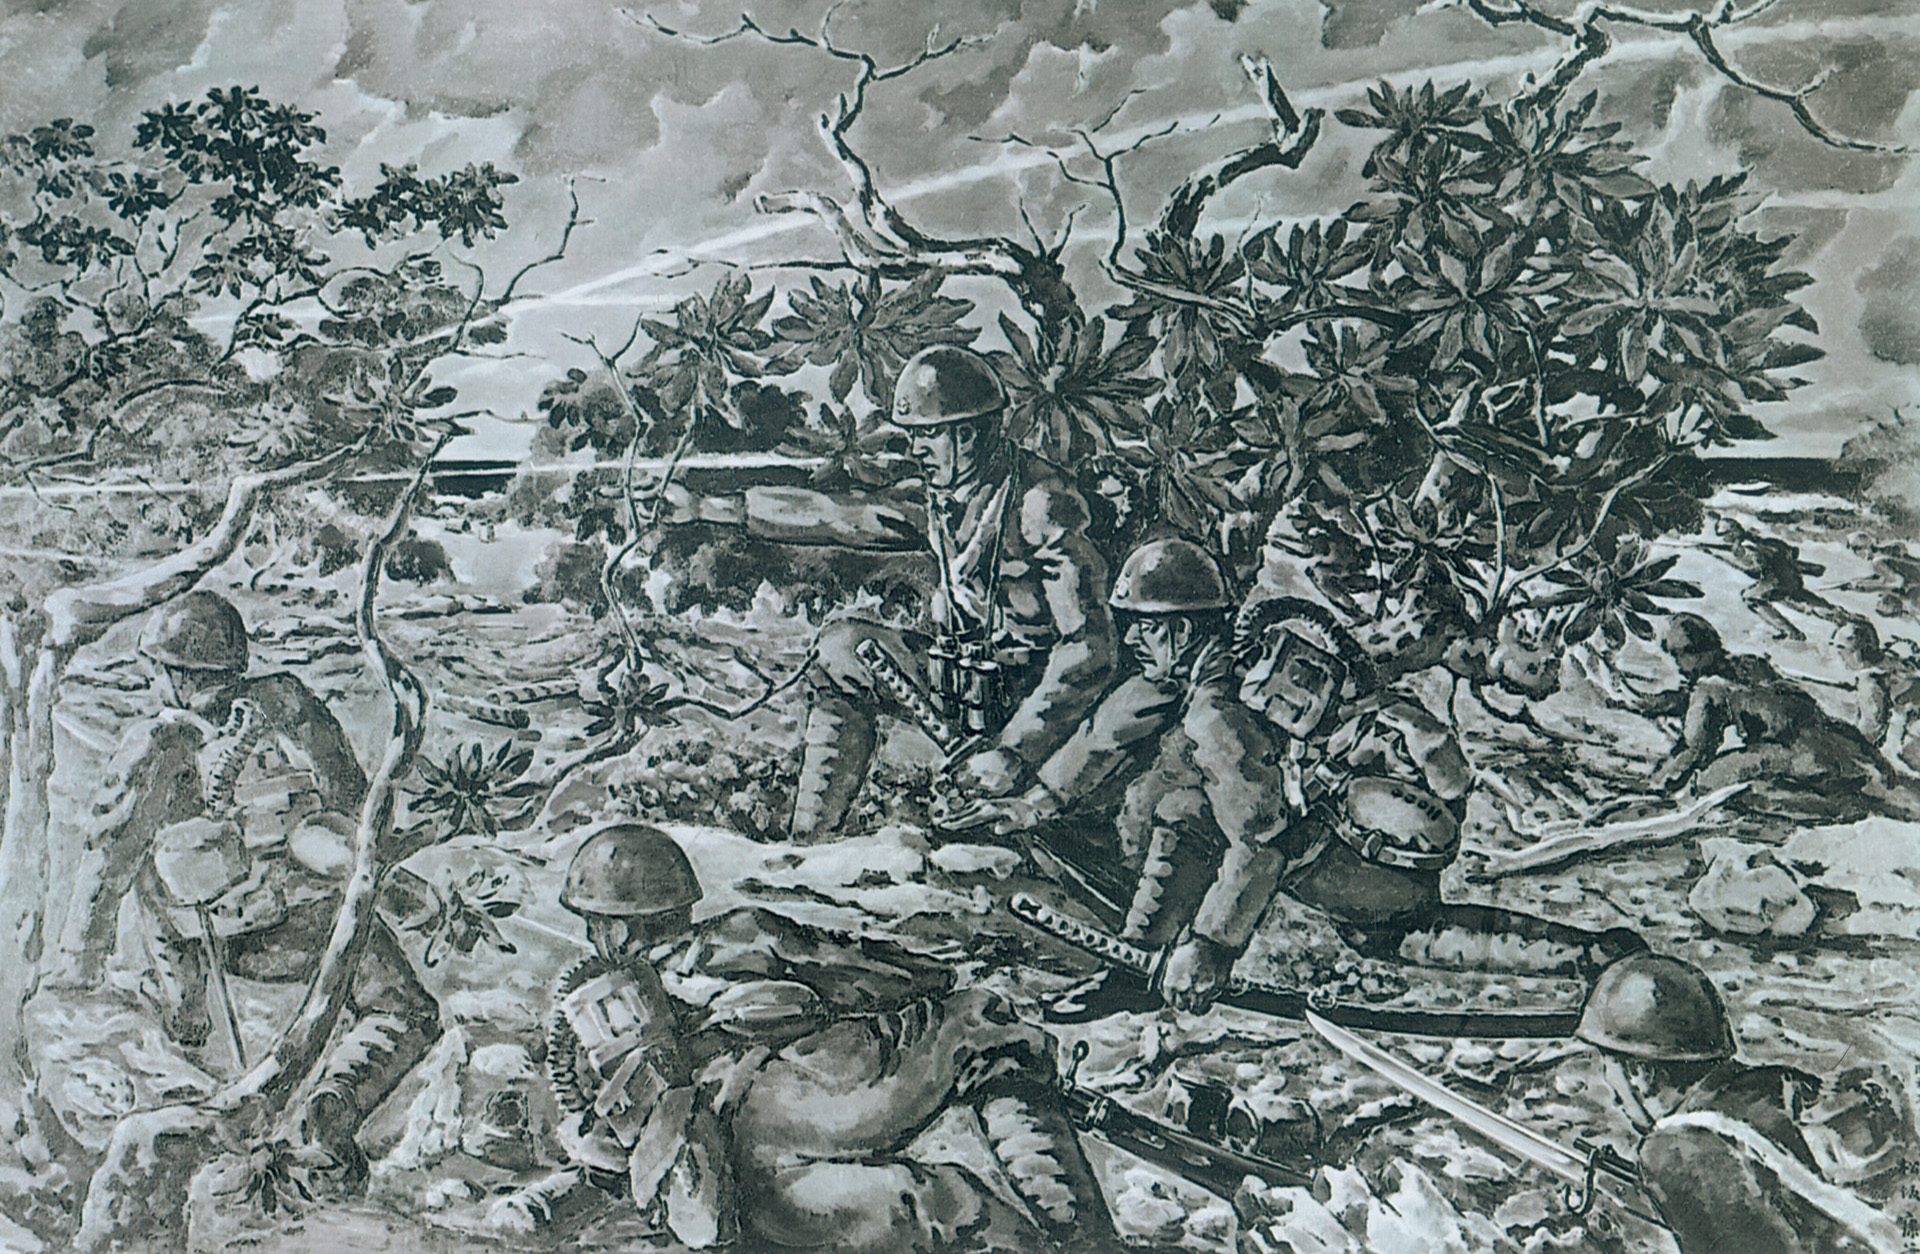 A Japanese artist created this image of his comrades moving warily forward on Wake Island.